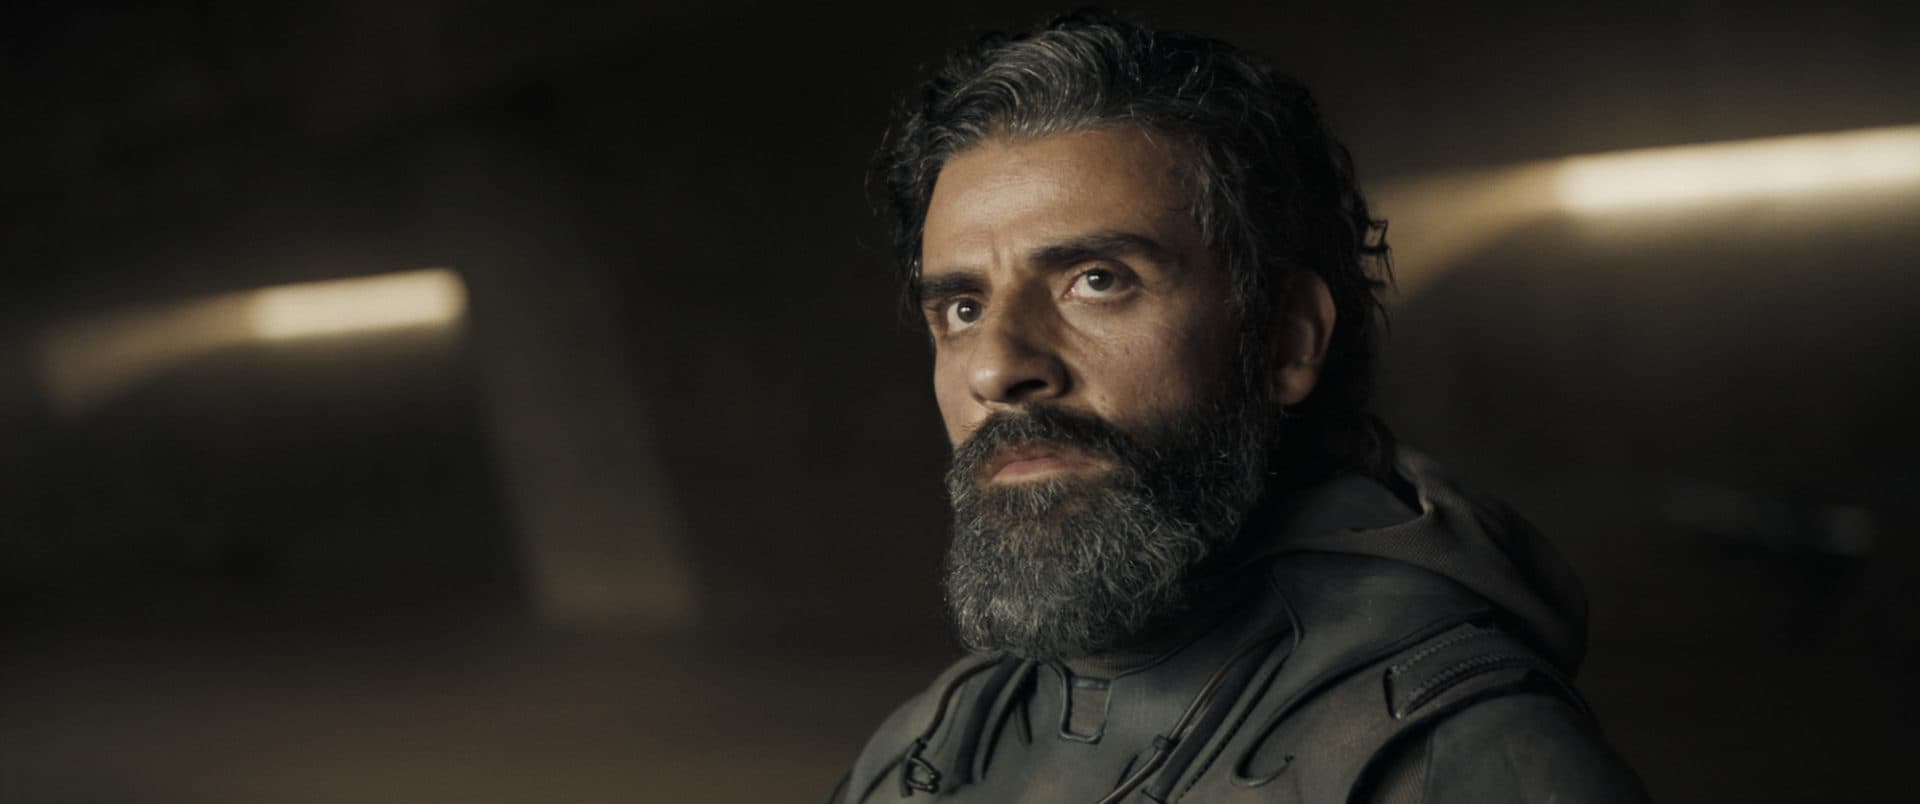 Oscar Isaac as Duke Leto Atreides. (Courtesy Warner Bros. Pictures and Legendary Pictures)